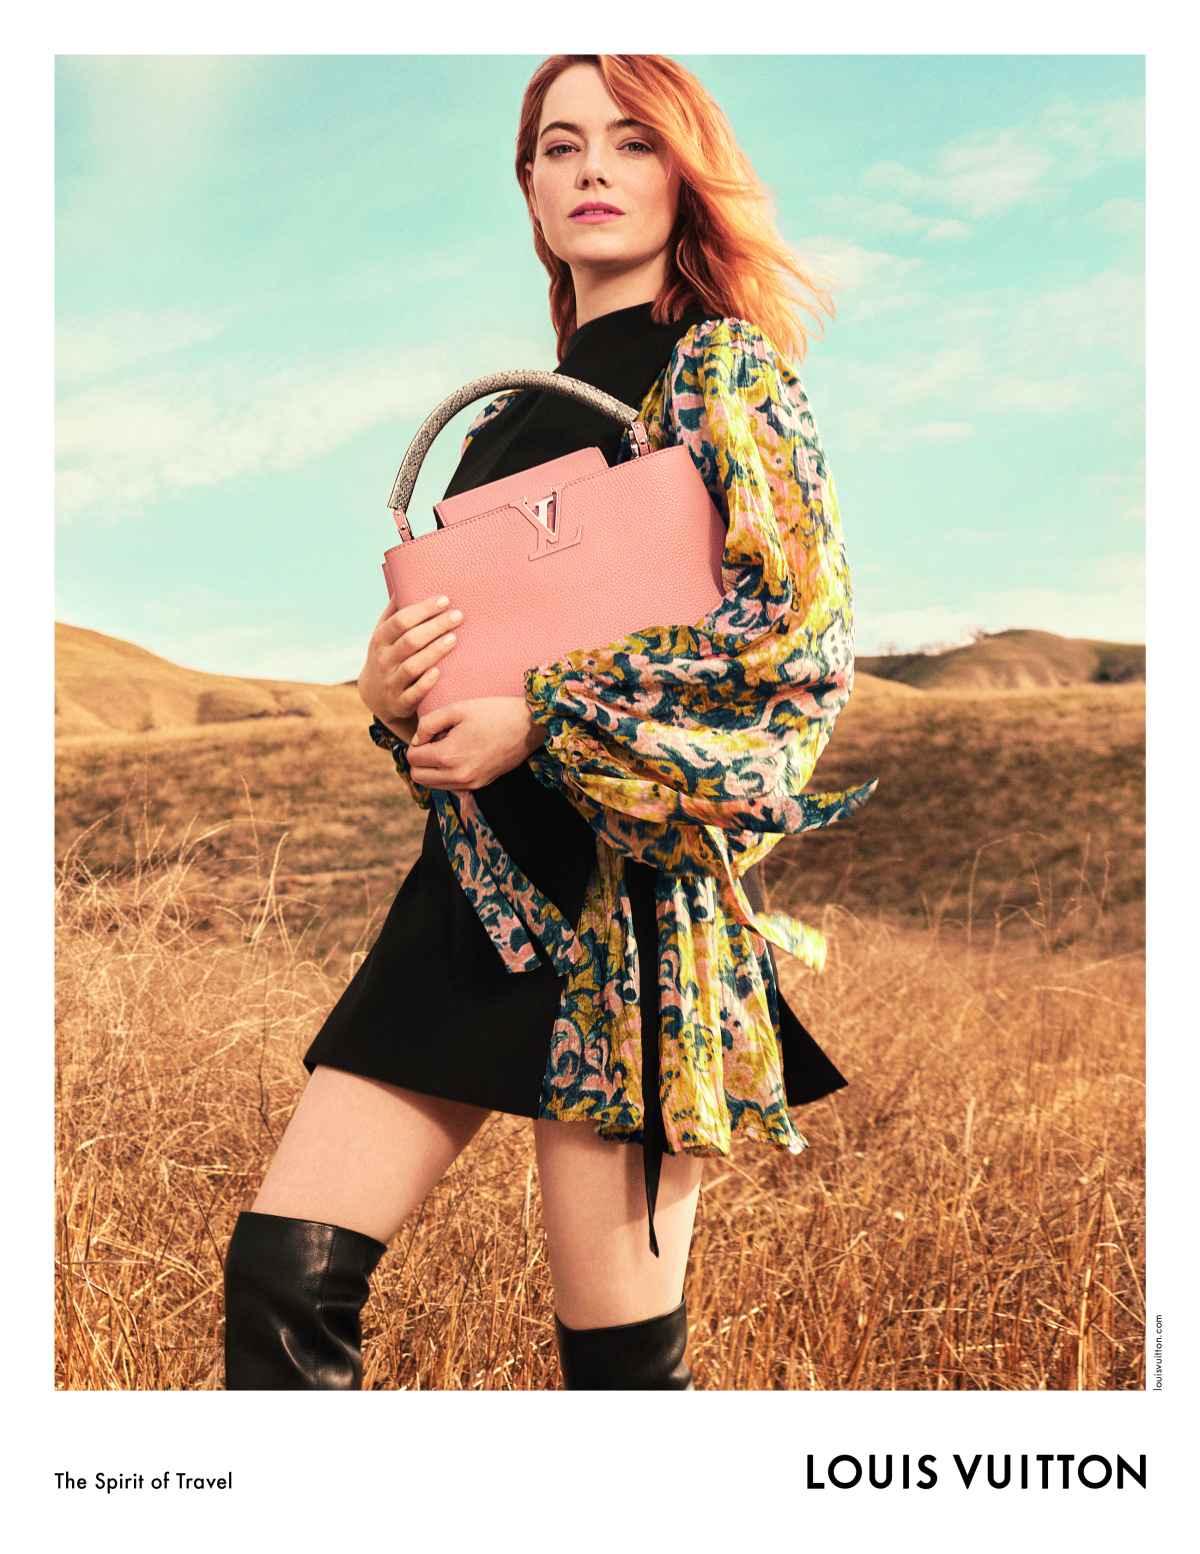 Louis Vuitton on X: Emma Stone for #LouisVuitton. Find the new